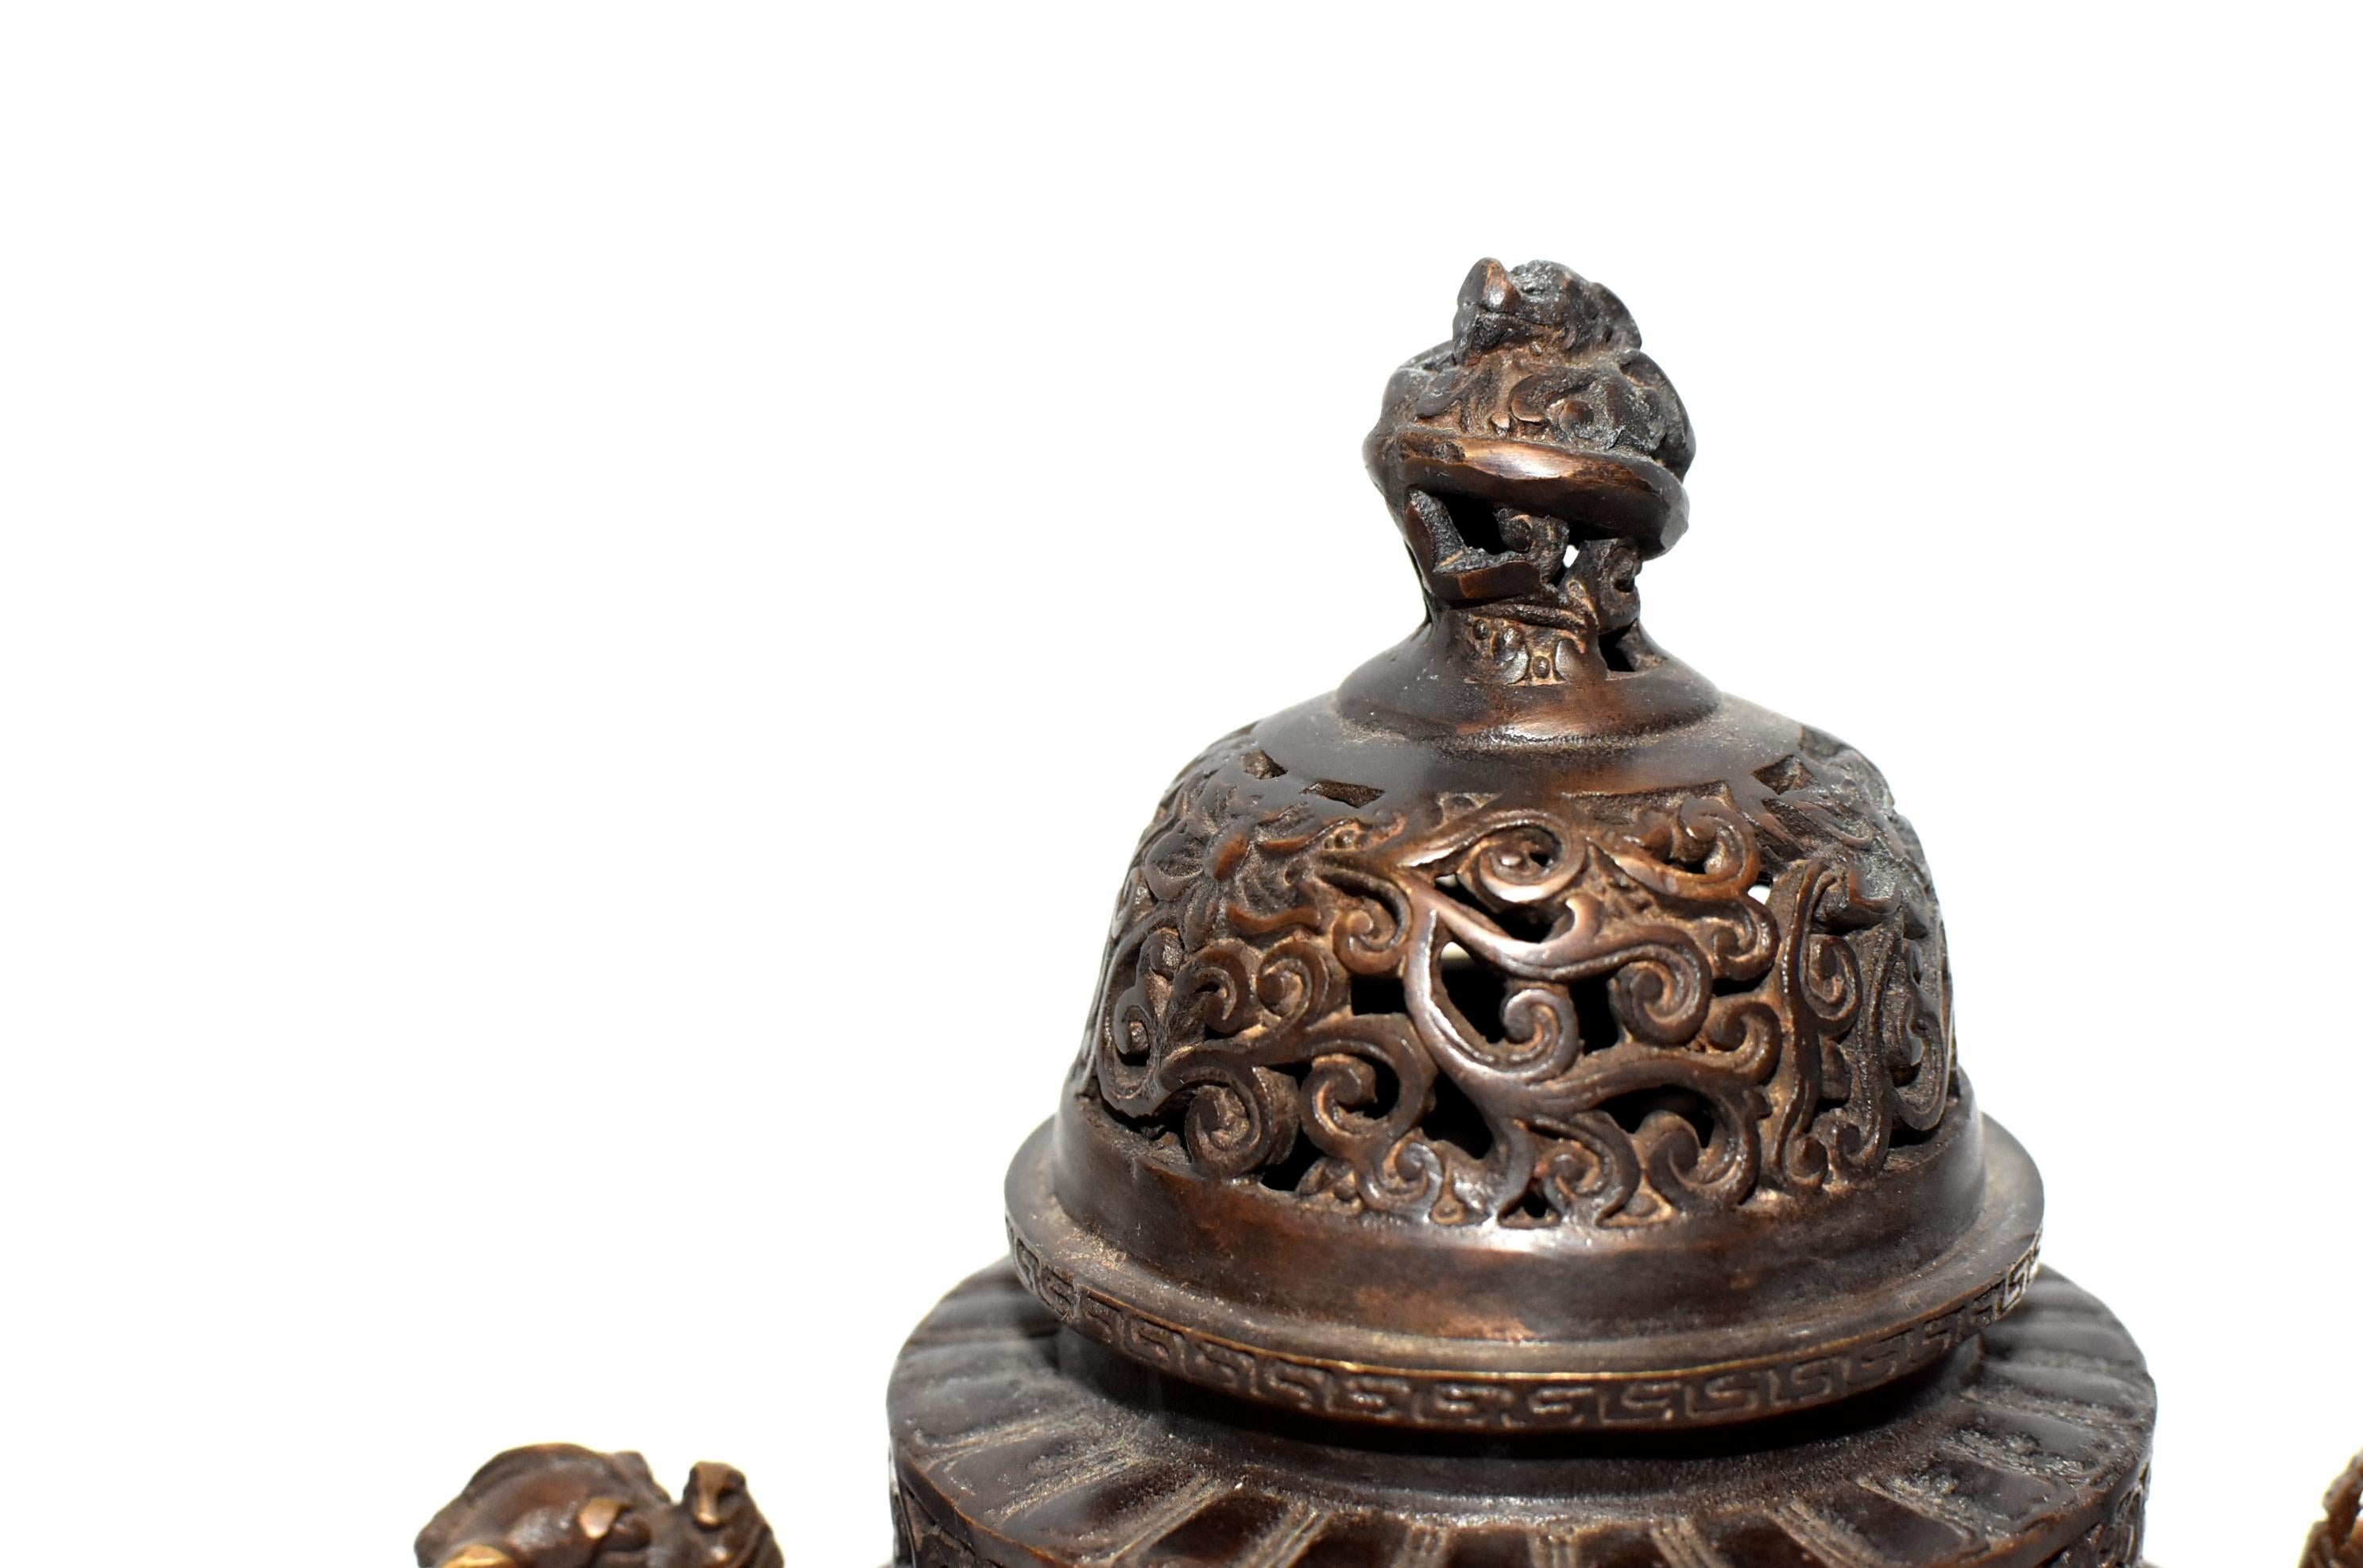 A fine, Chinese antique bronze incense burner. 3-foot, elaborately pierced top with a coiled dragon finial, 2-dragon handles, a round capacity body. Handmade. Signed Qing Qian Long Period, although we believe it is of a later day (19th century) make.